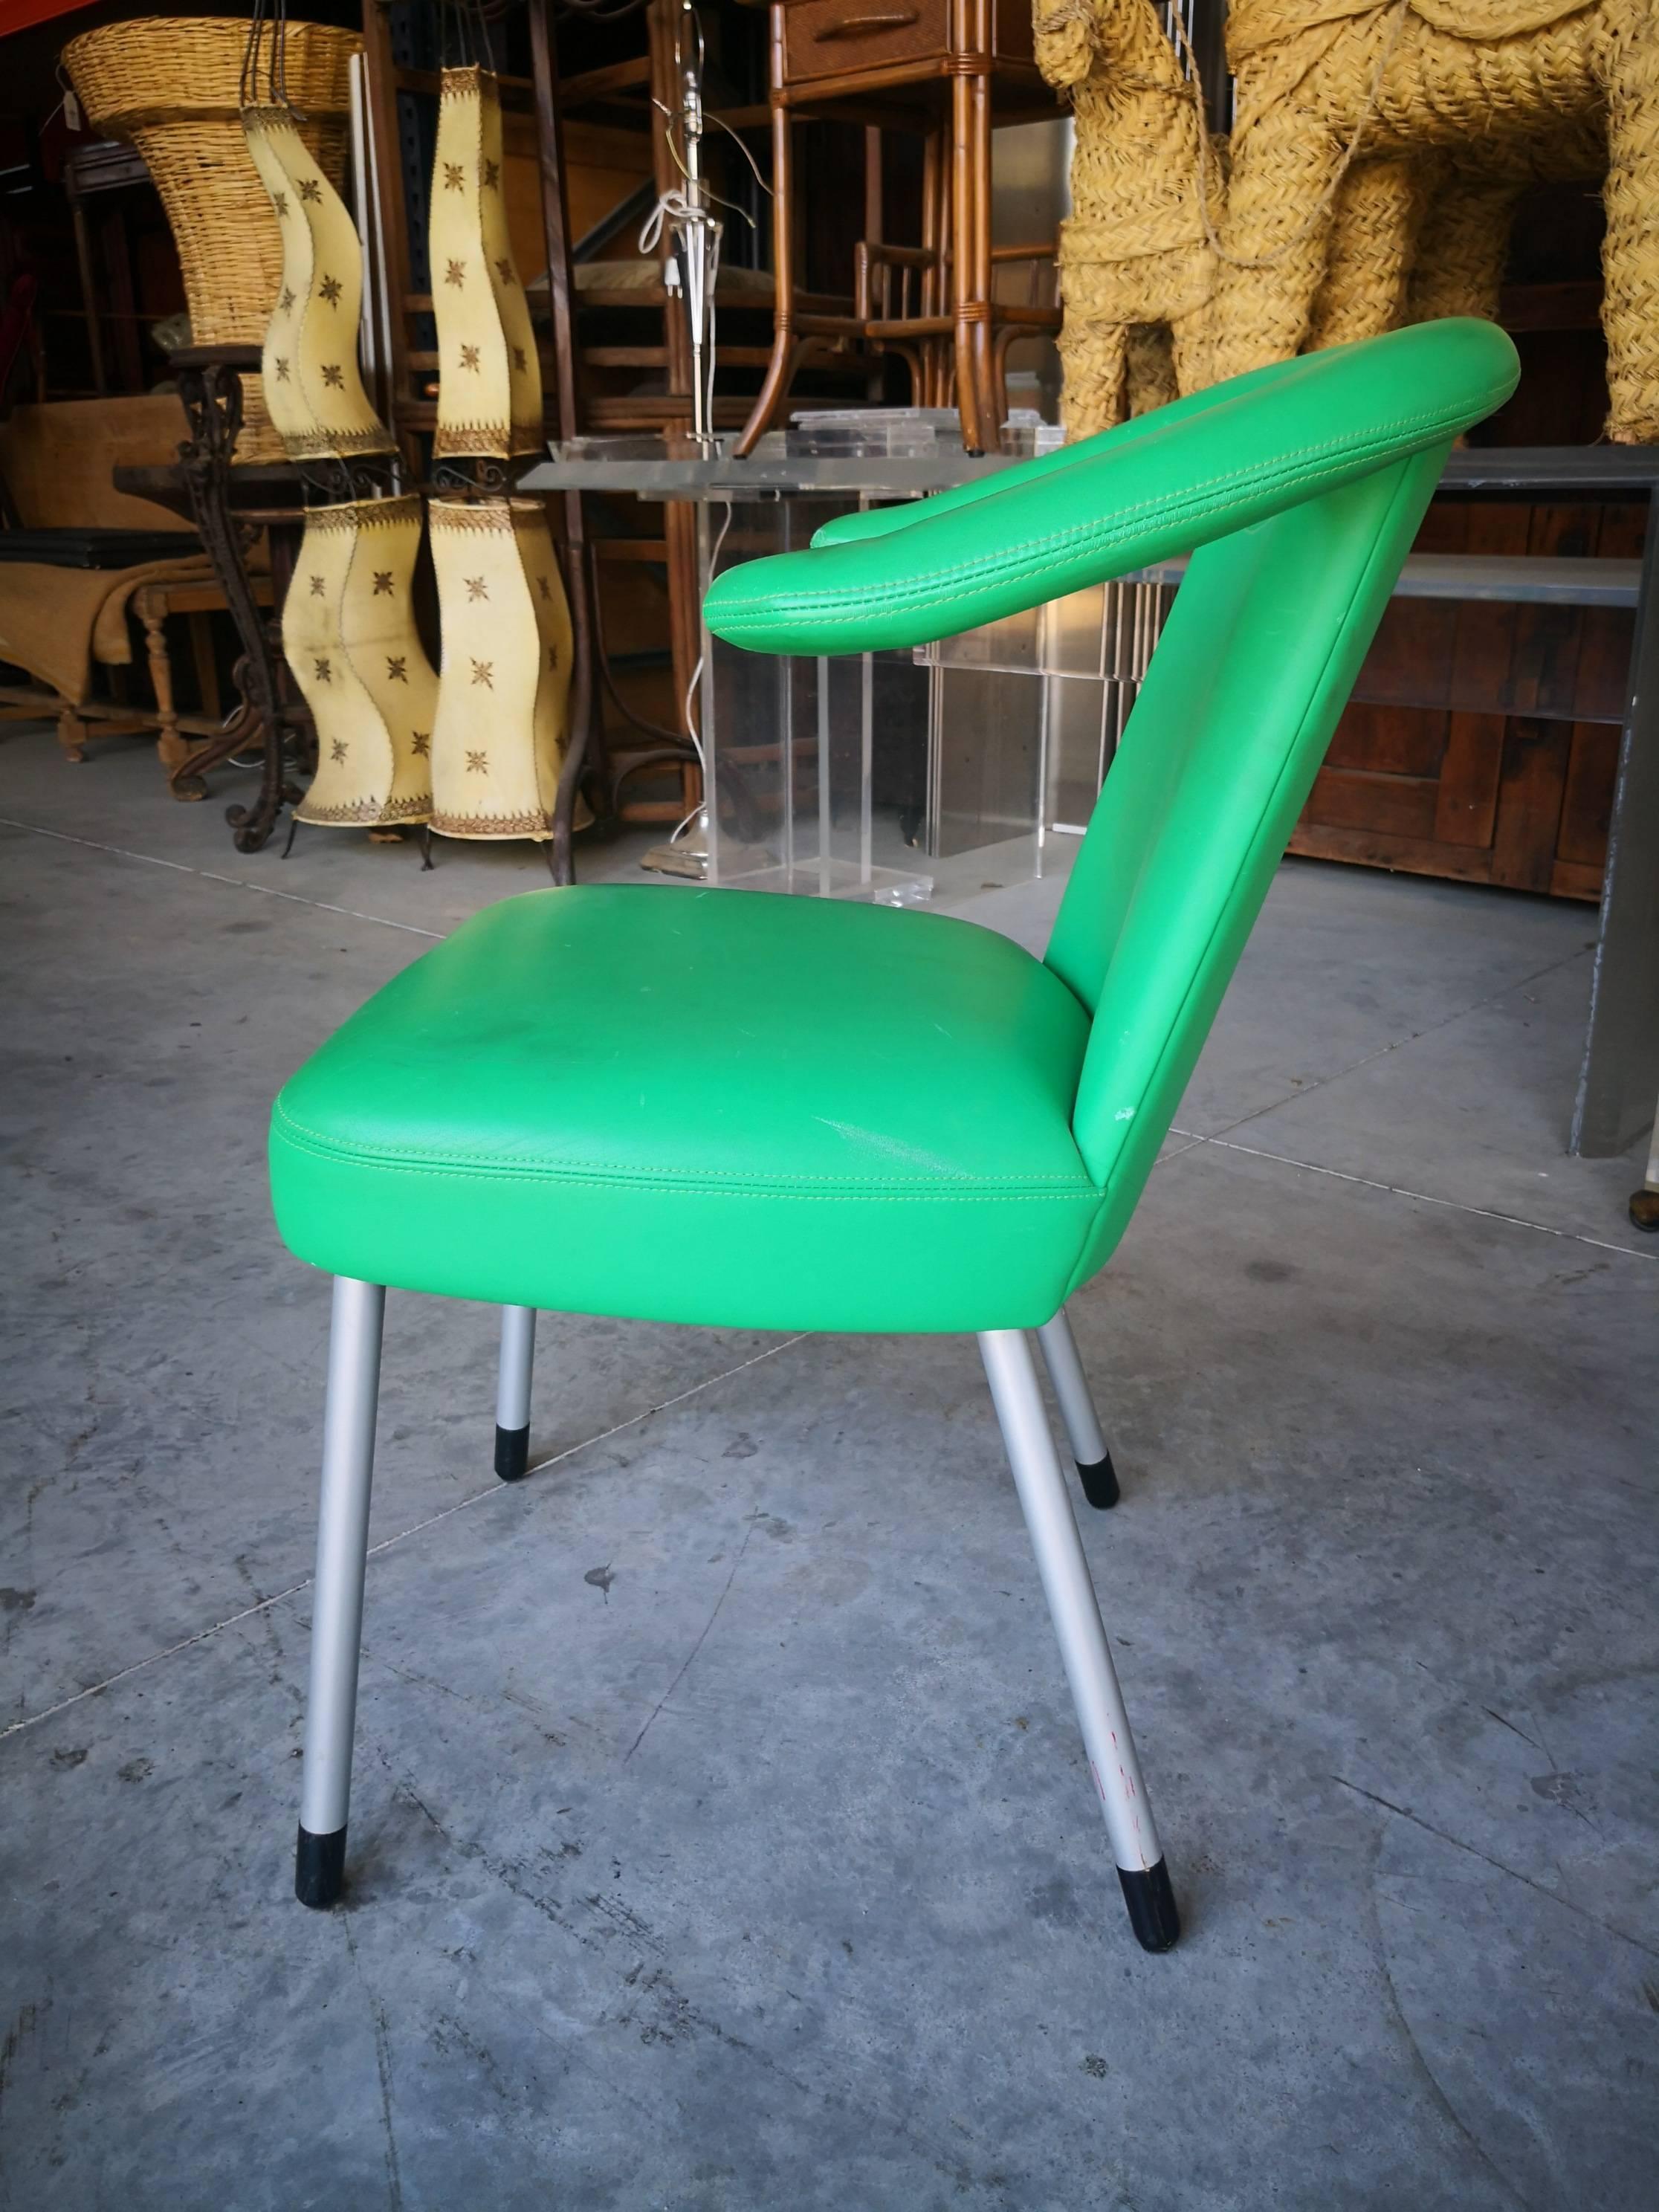 1980s Wittman leather upholstered green chair with aluminum legs.

